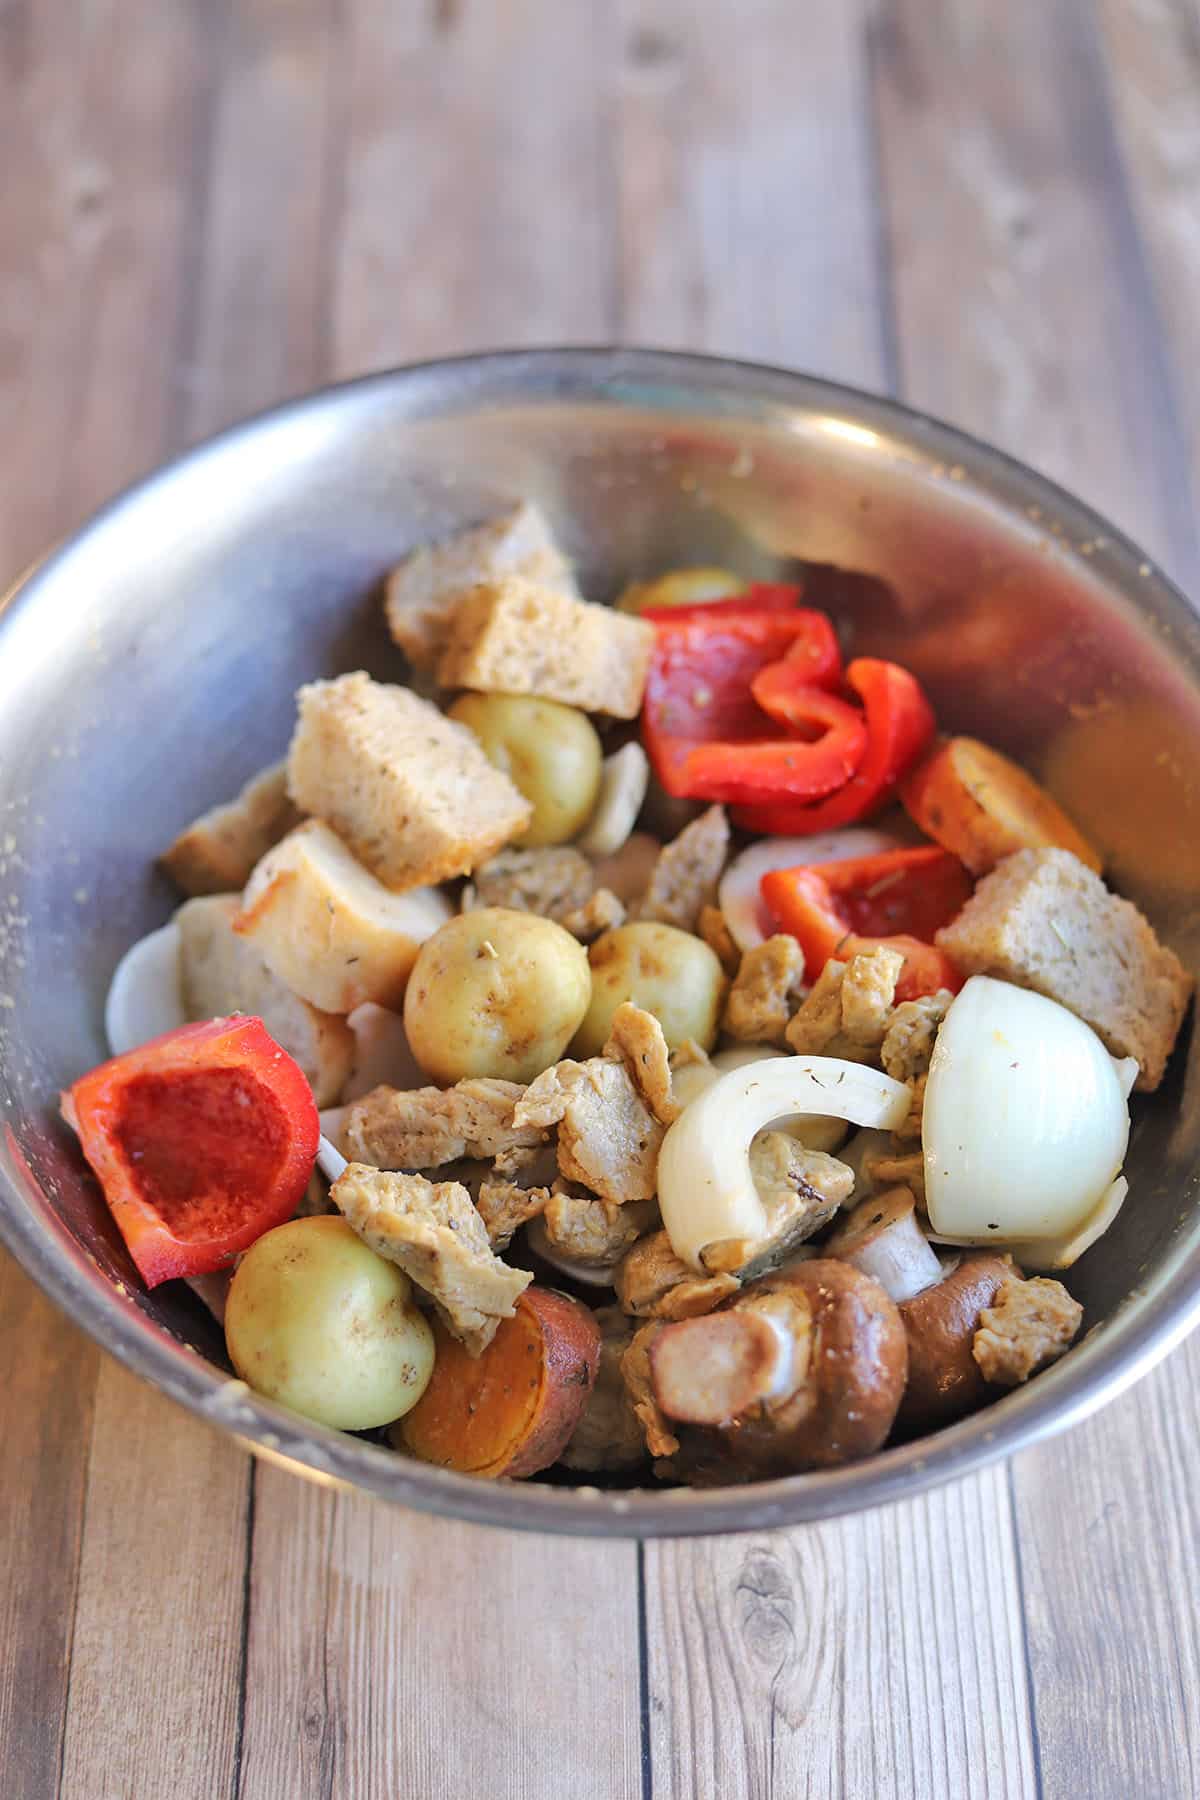 Bread, potatoes, sweet potatoes, bell peppers, onions, and mushrooms in mixing bowl.